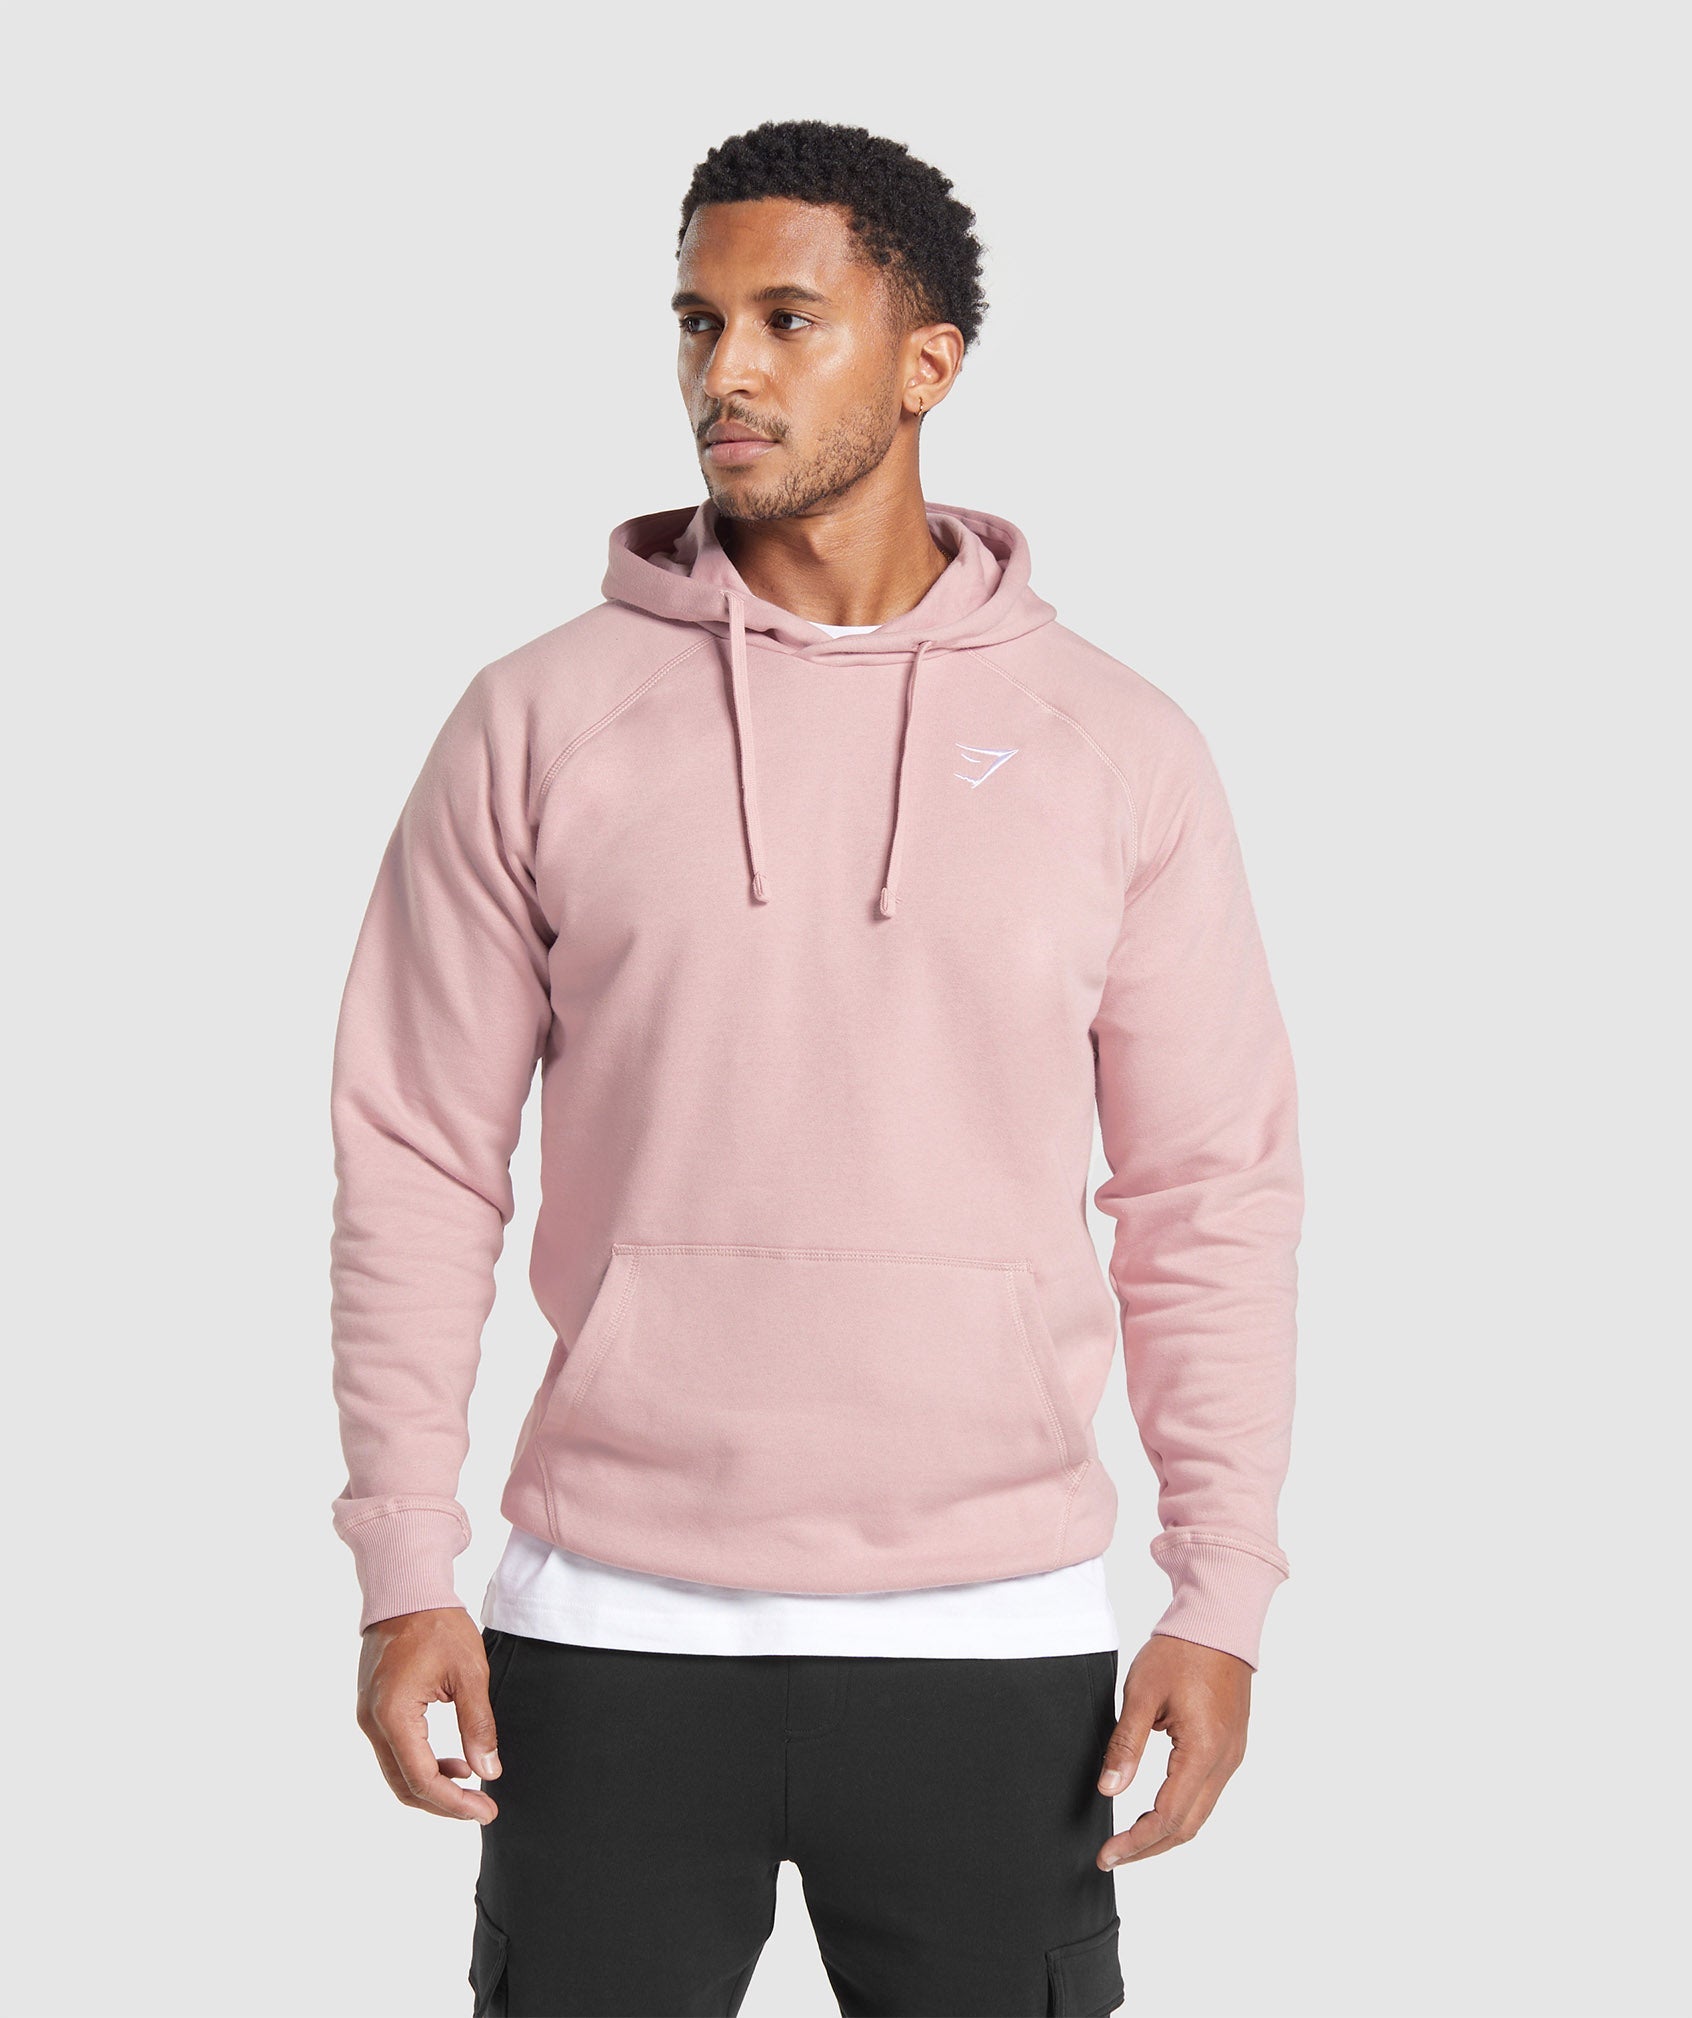 Crest Hoodie in {{variantColor} is out of stock